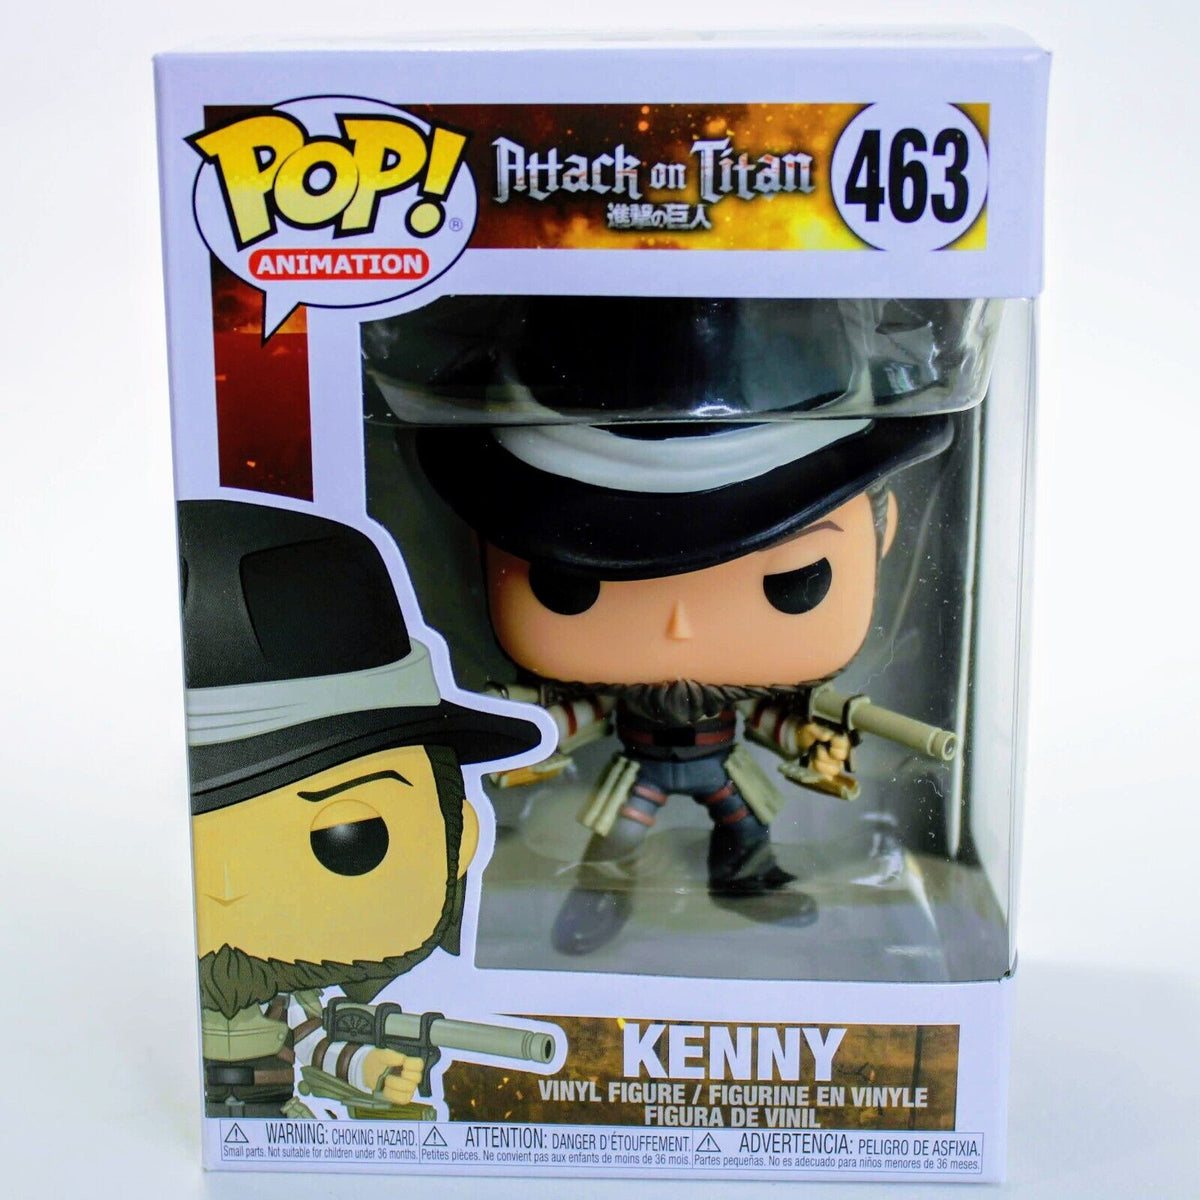 Attack on Titan - Kenny - POP! Animation action figure 463